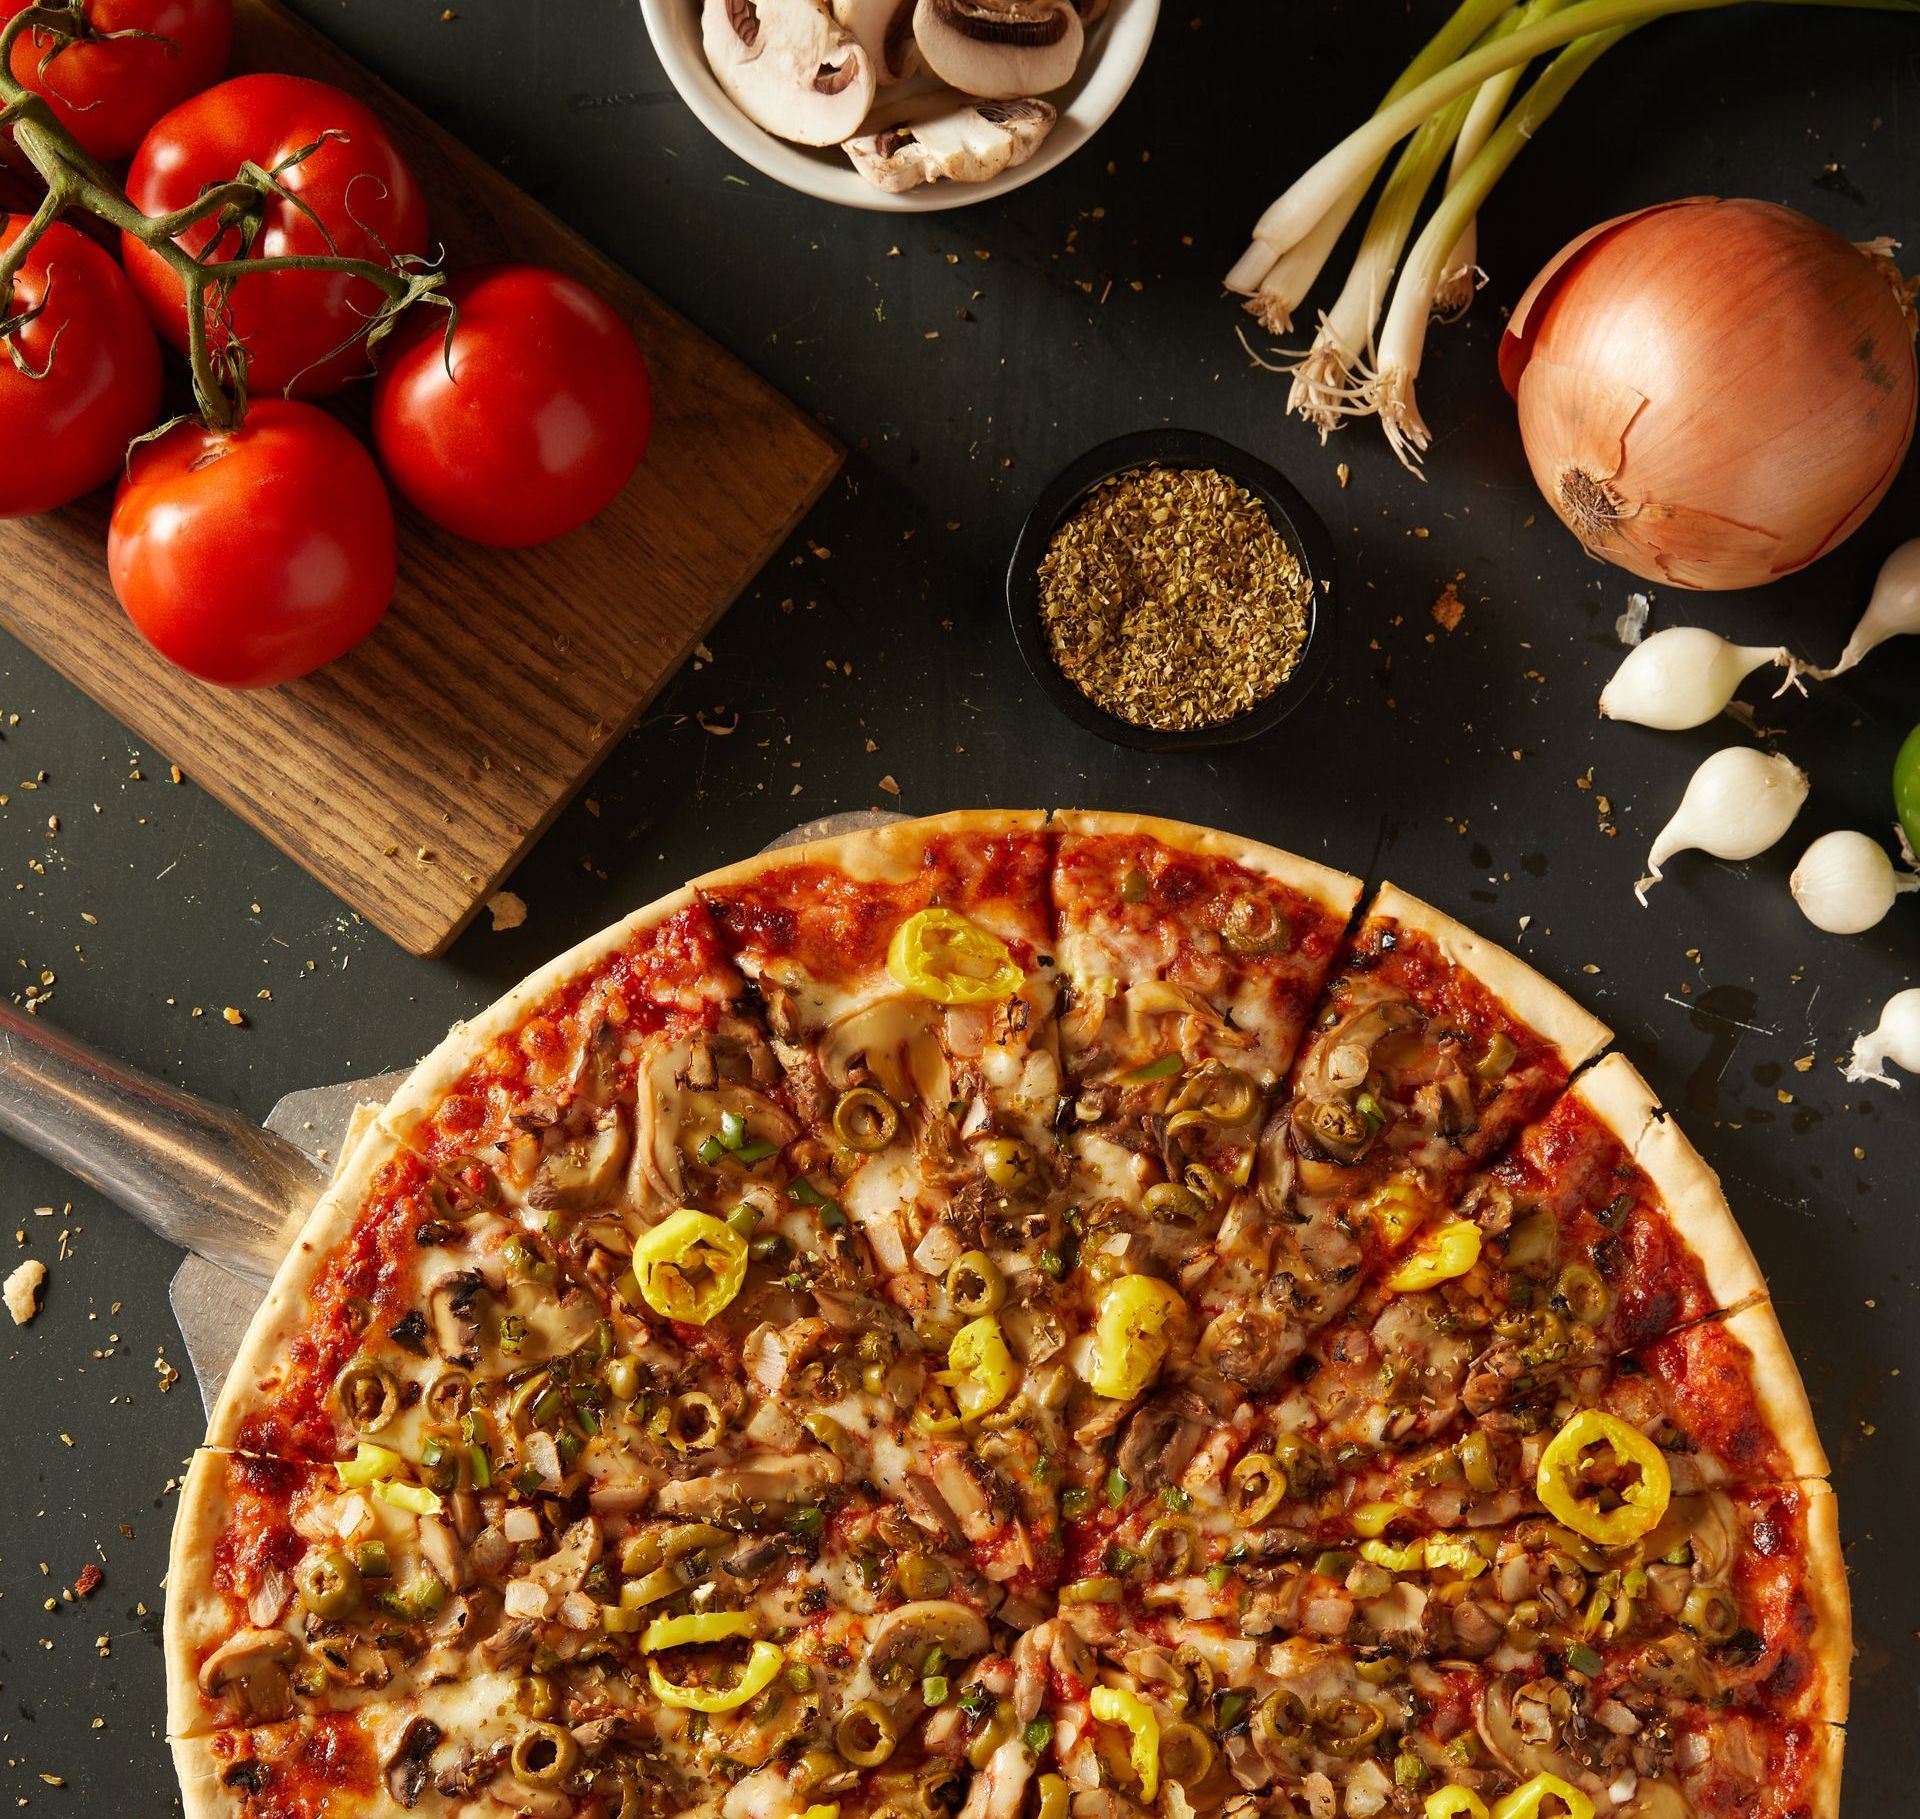 A pizza surrounded by vegetables and tomatoes on a table